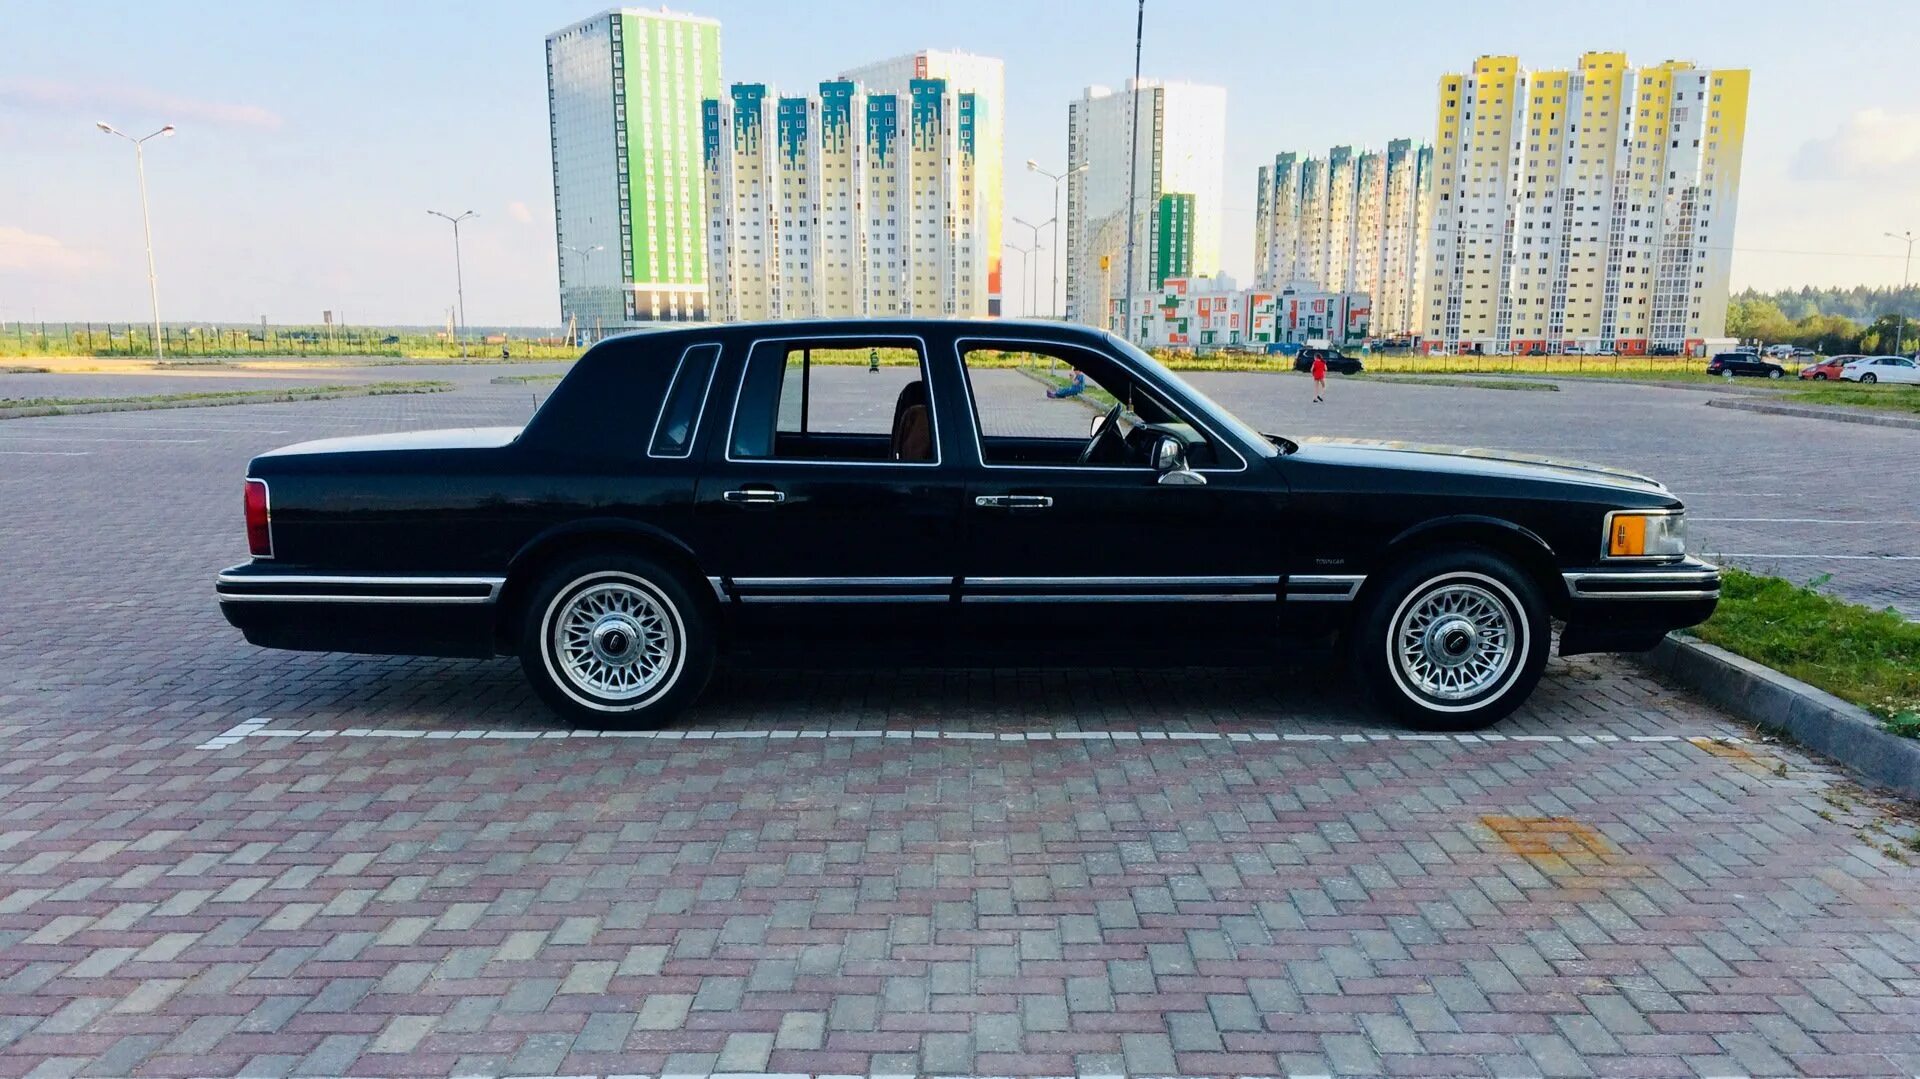 Таун кар 2. Lincoln Town car 1992. Lincoln Town car 1993. Lincoln Town car 2. Lincoln Town car 1994.